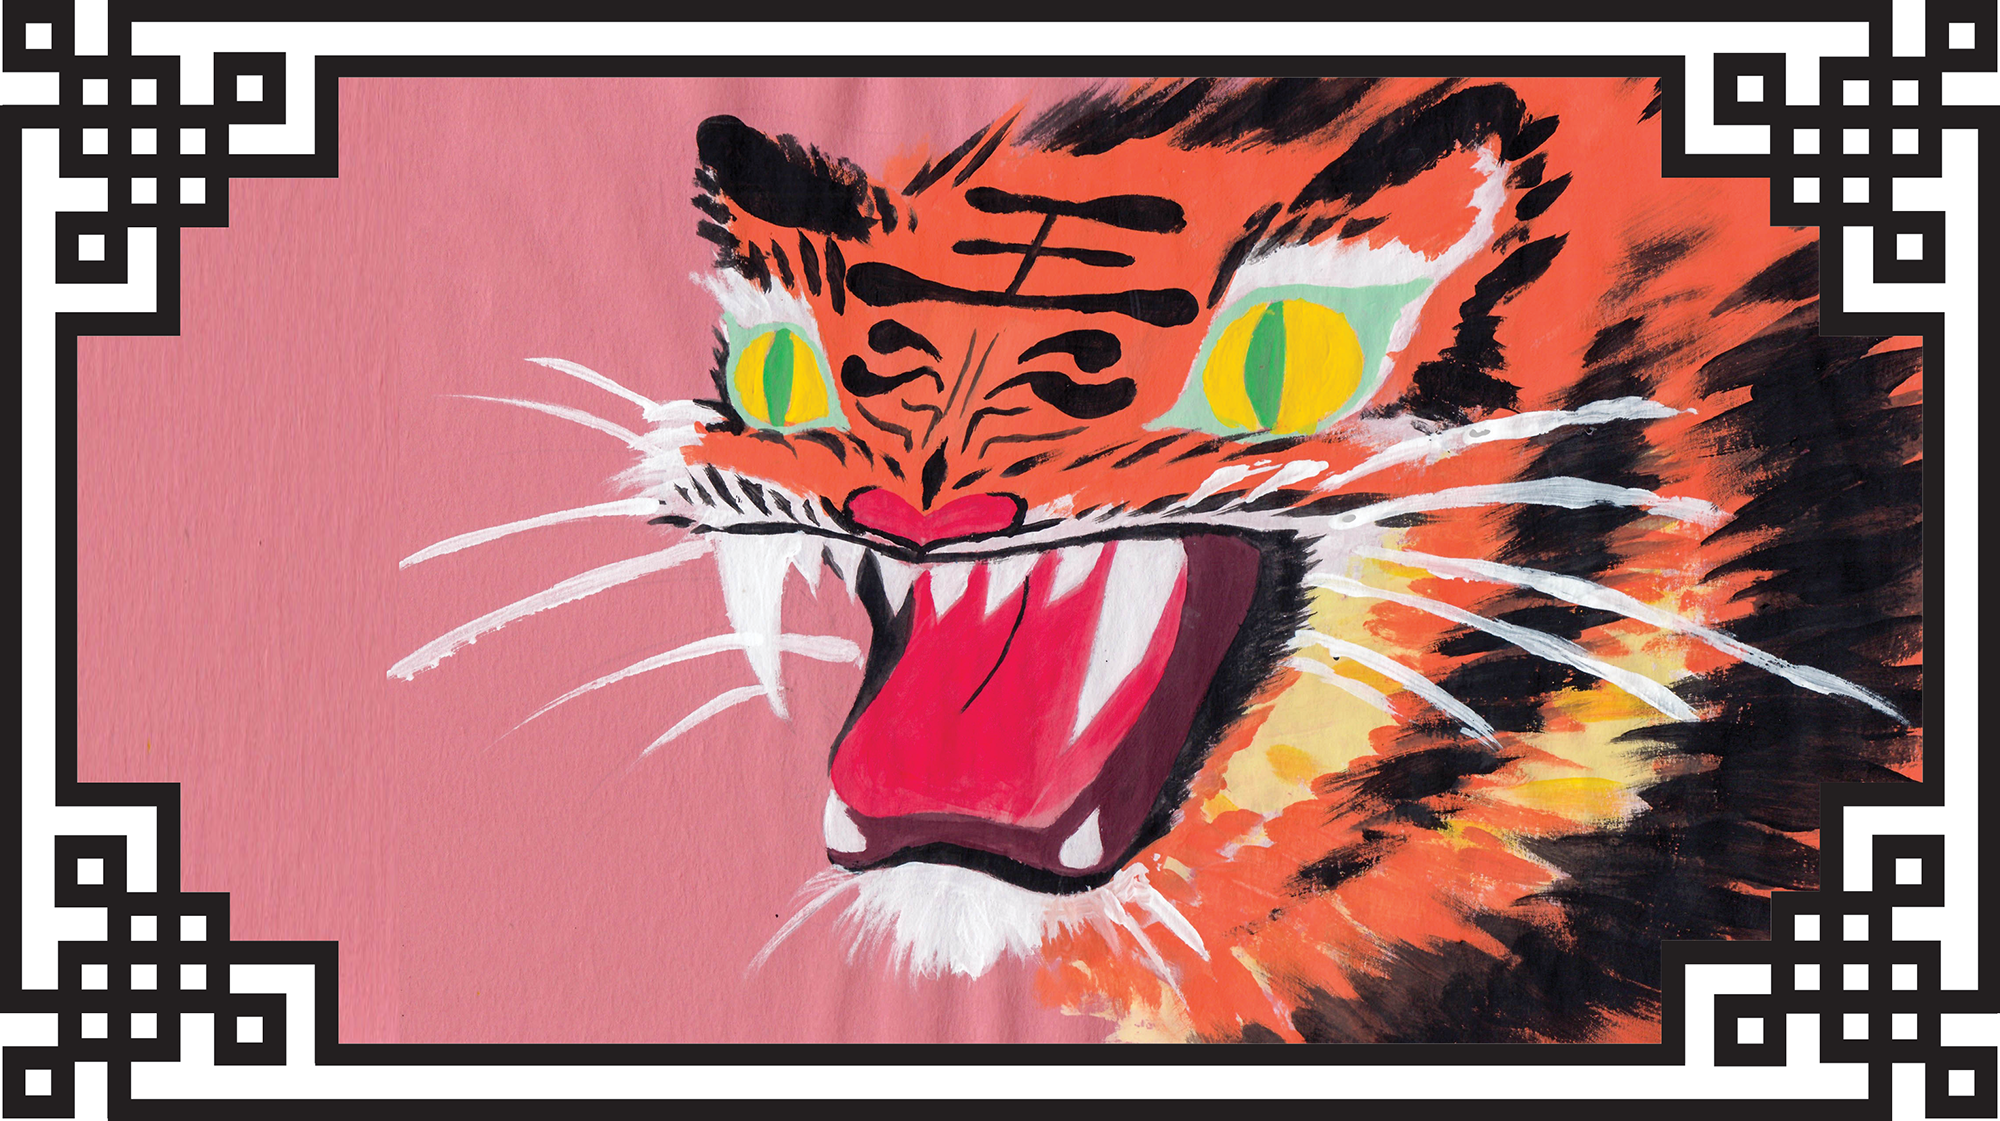 Landscape Yue Moon artwork of a stylized Tiger with green eyes on a red/pink background with a traditional Chinese black & white border around it.